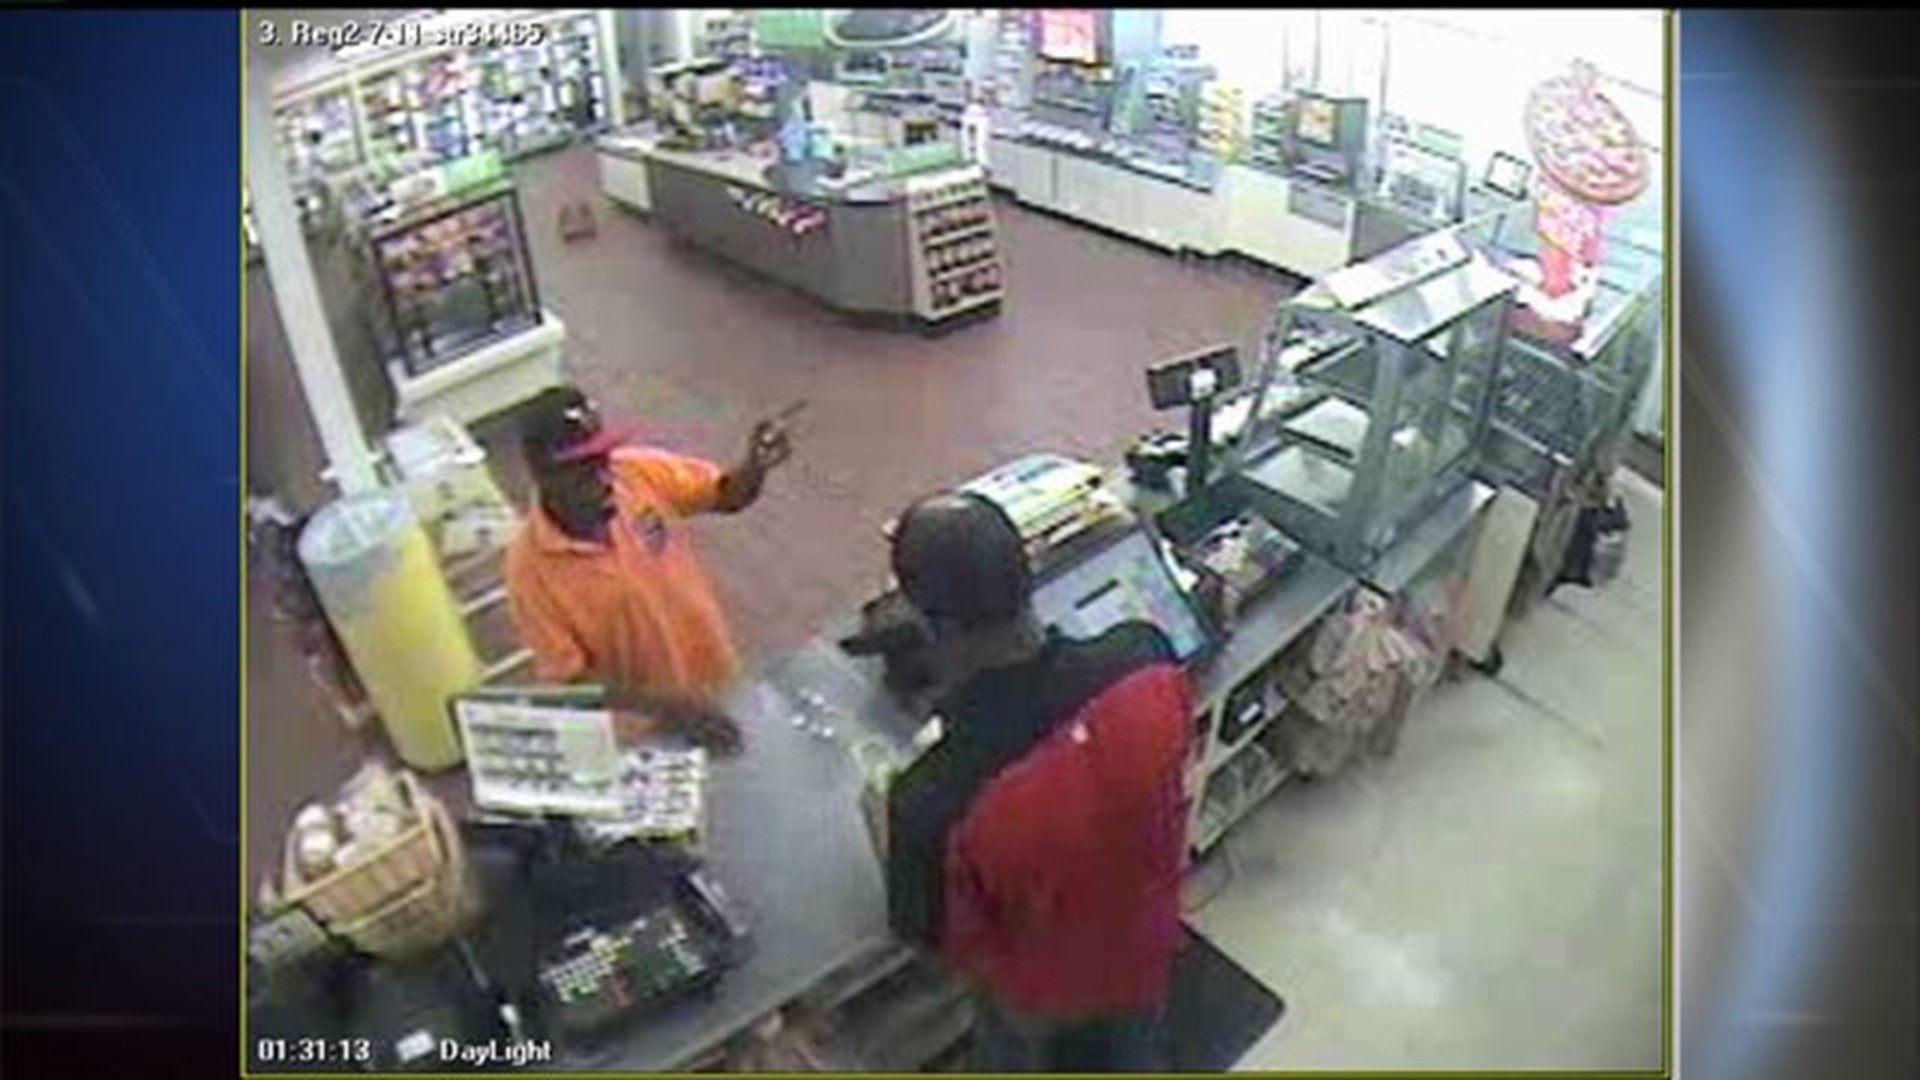 Armed robbery in East Moline